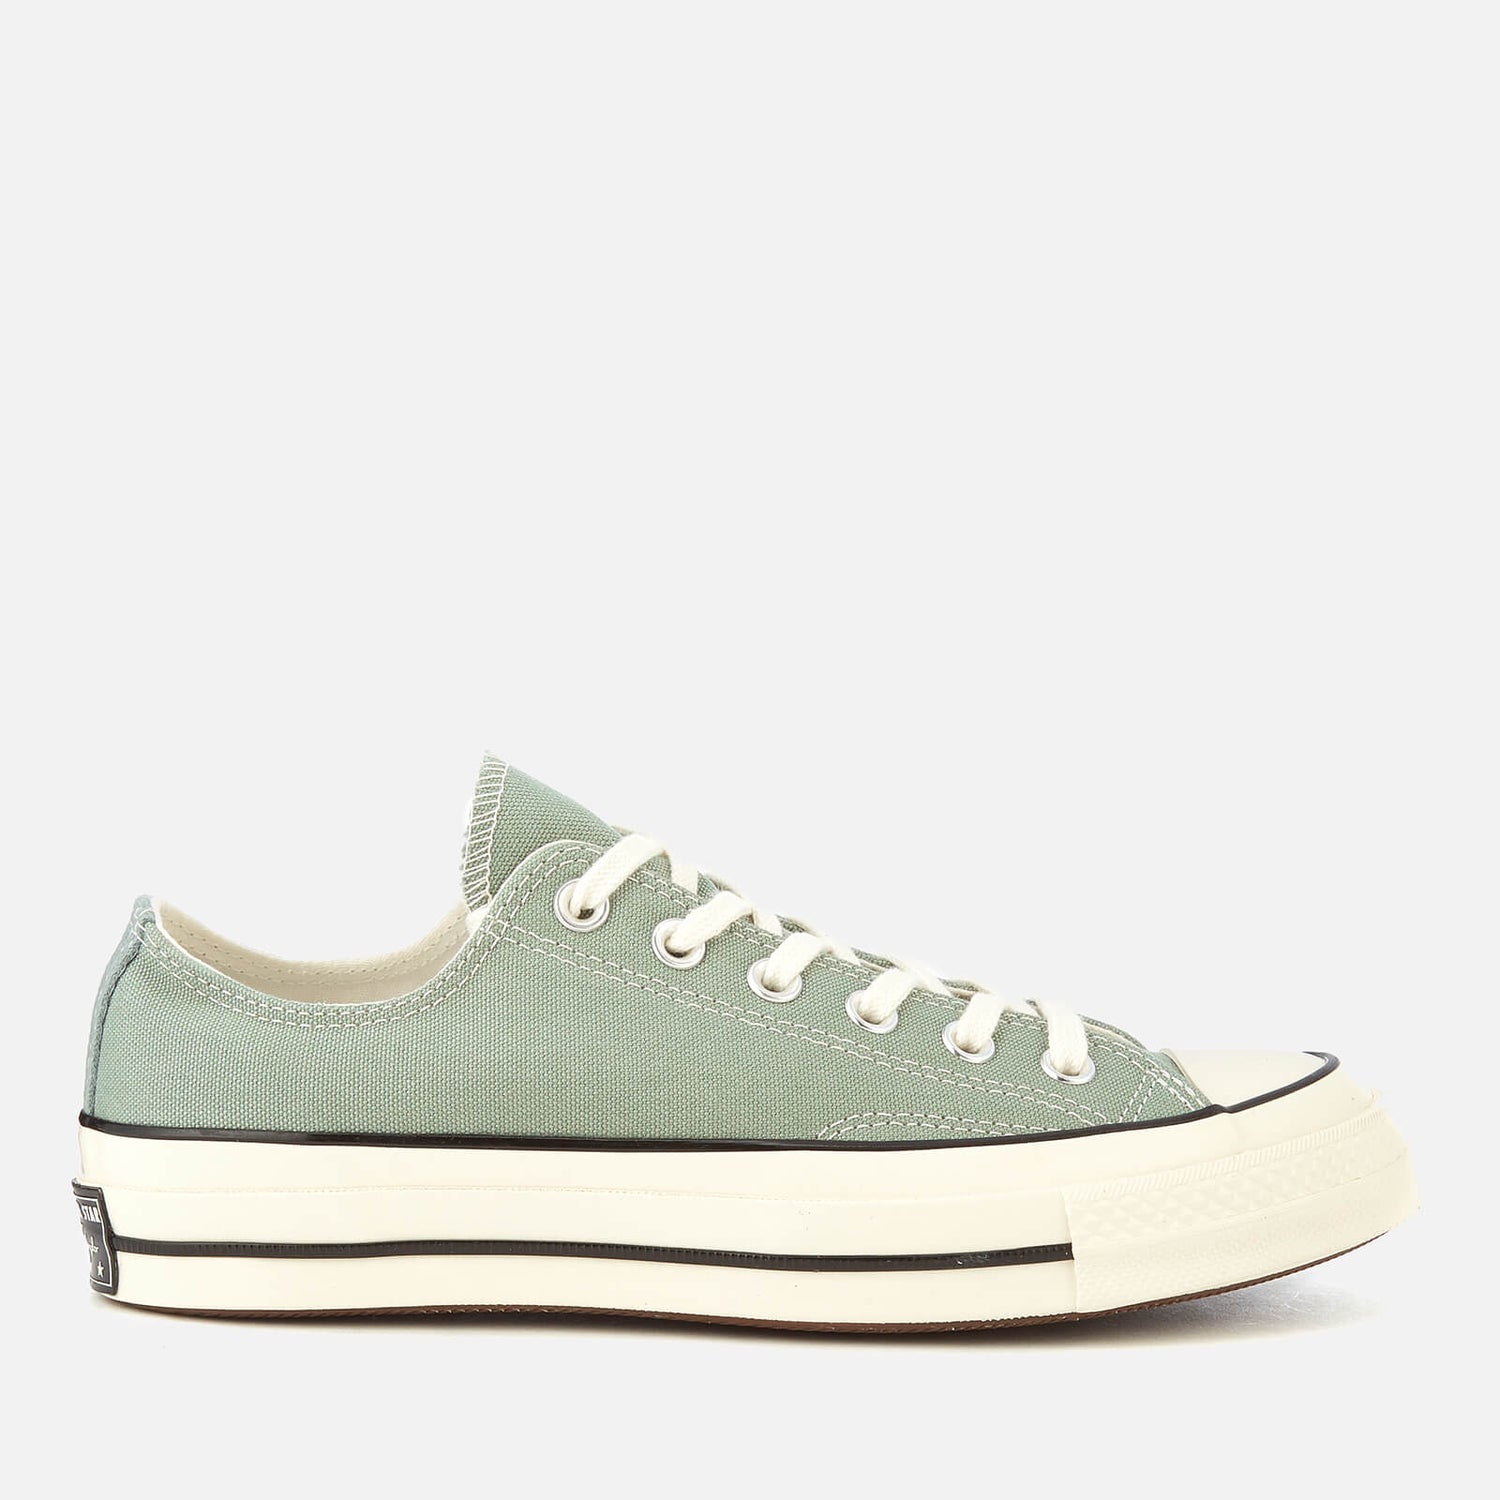 Converse Chuck Taylor All Star '70 Ox Trainers - Mica Green/Black/Egret ...